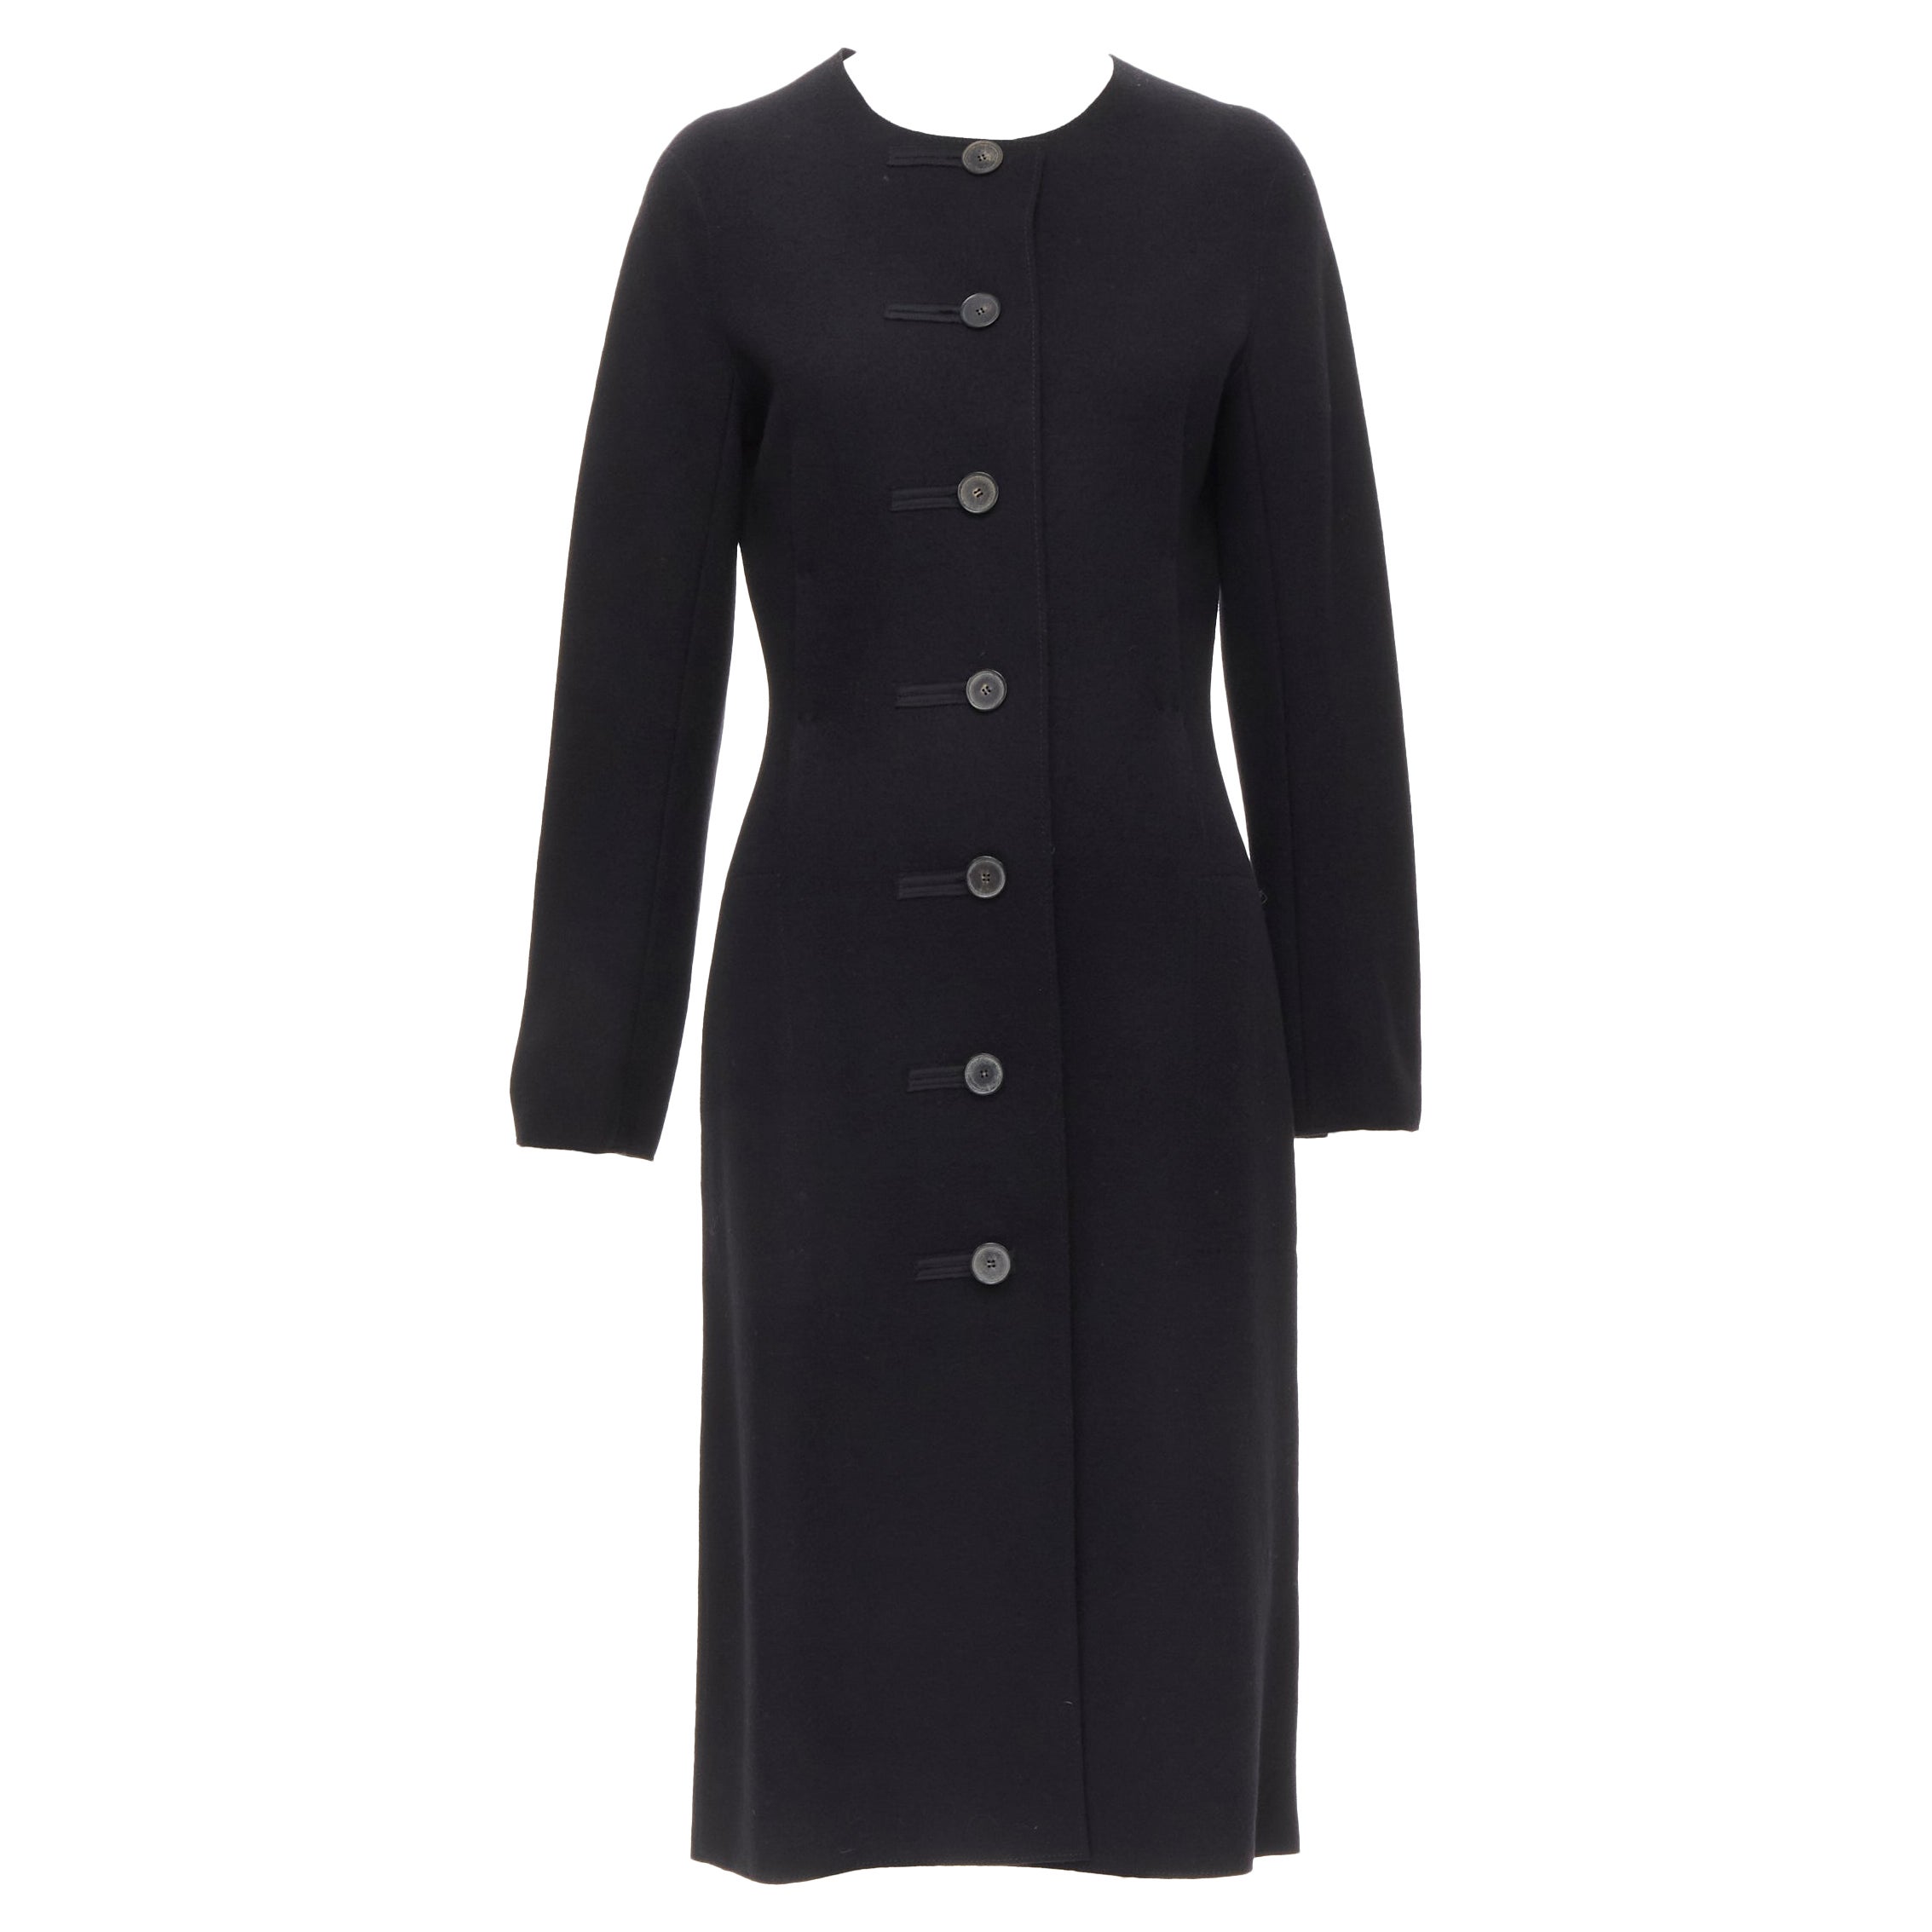 LANVIN Alber Elbaz 2004 black wool pinched darts button front fitted coat FR38 S For Sale